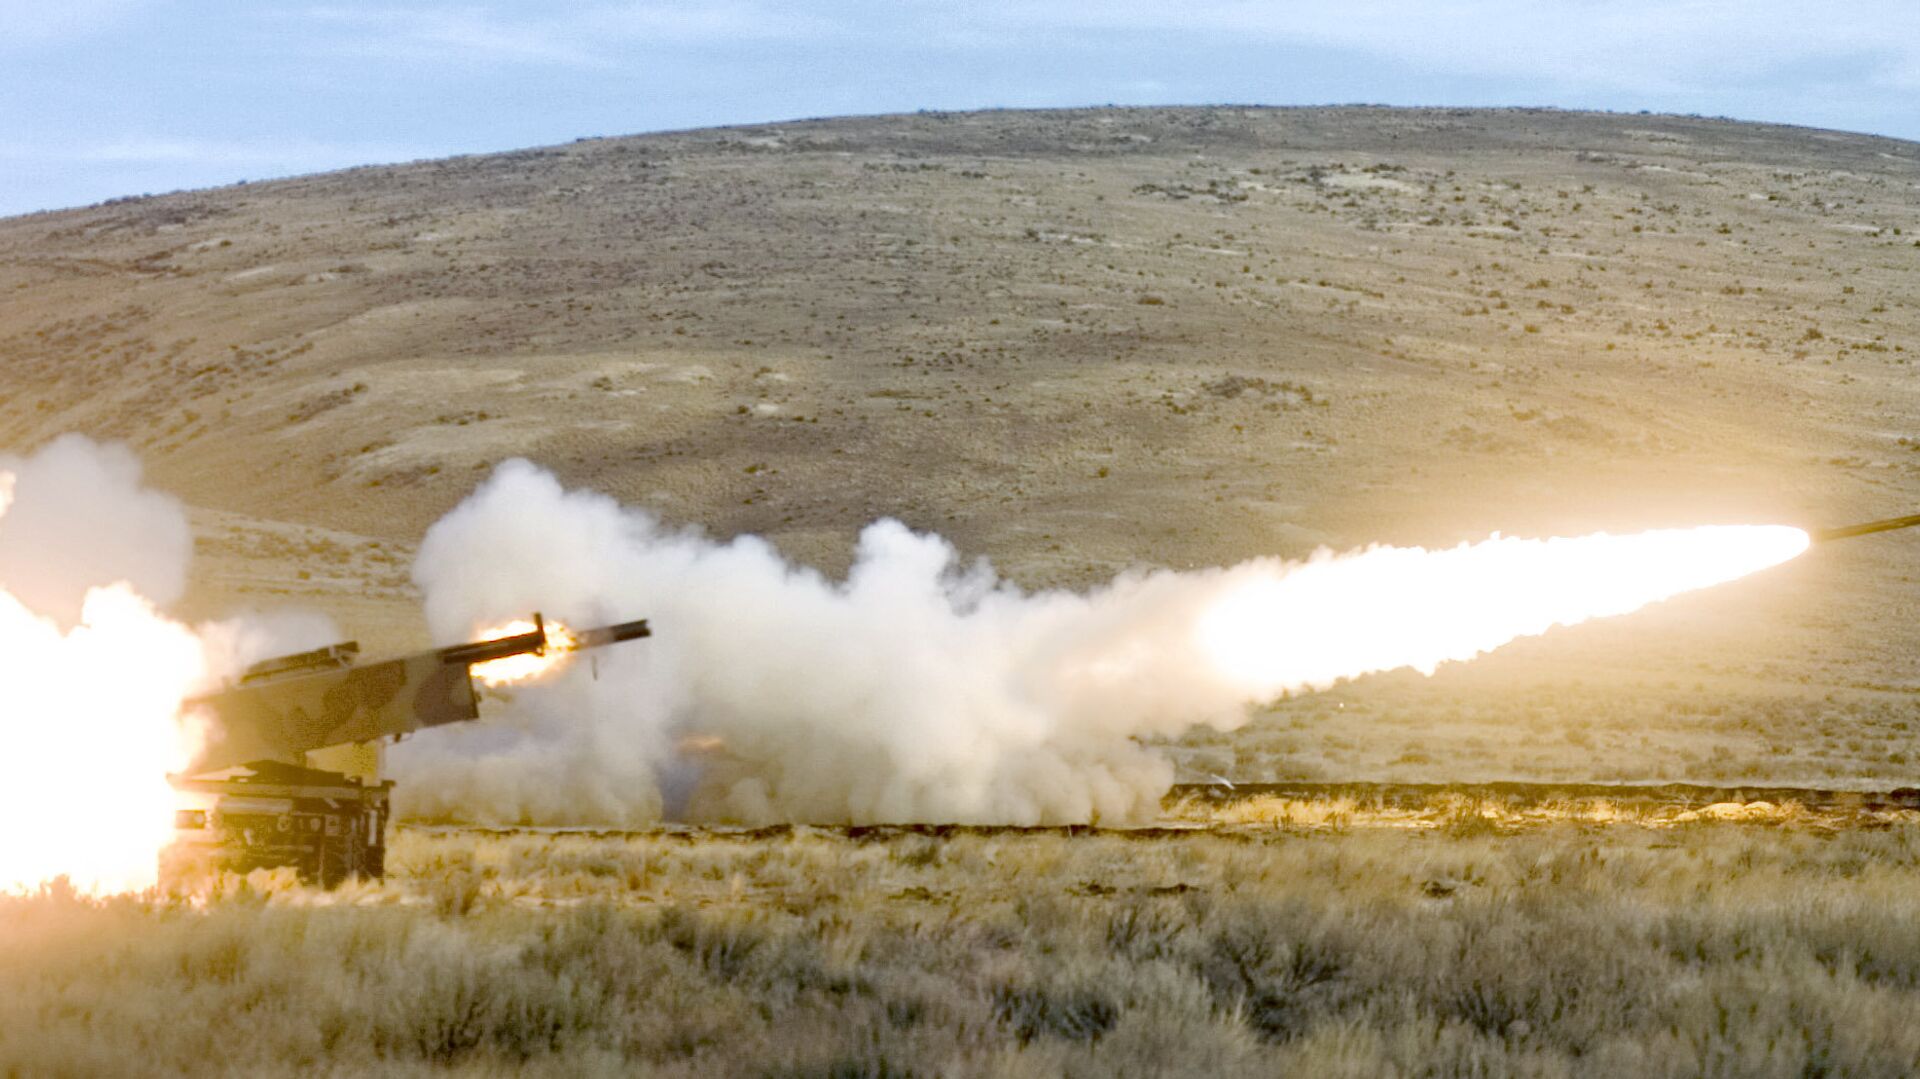 Members of the 17th Fires Brigade from Ft. Lewis fire two High Mobility Artillery Rocket System (HIMARS) rockets simultaneously in a training exercise at Yakima Training Center Nov. 1, 2007 in Yakima, Wash. - Sputnik International, 1920, 01.06.2022